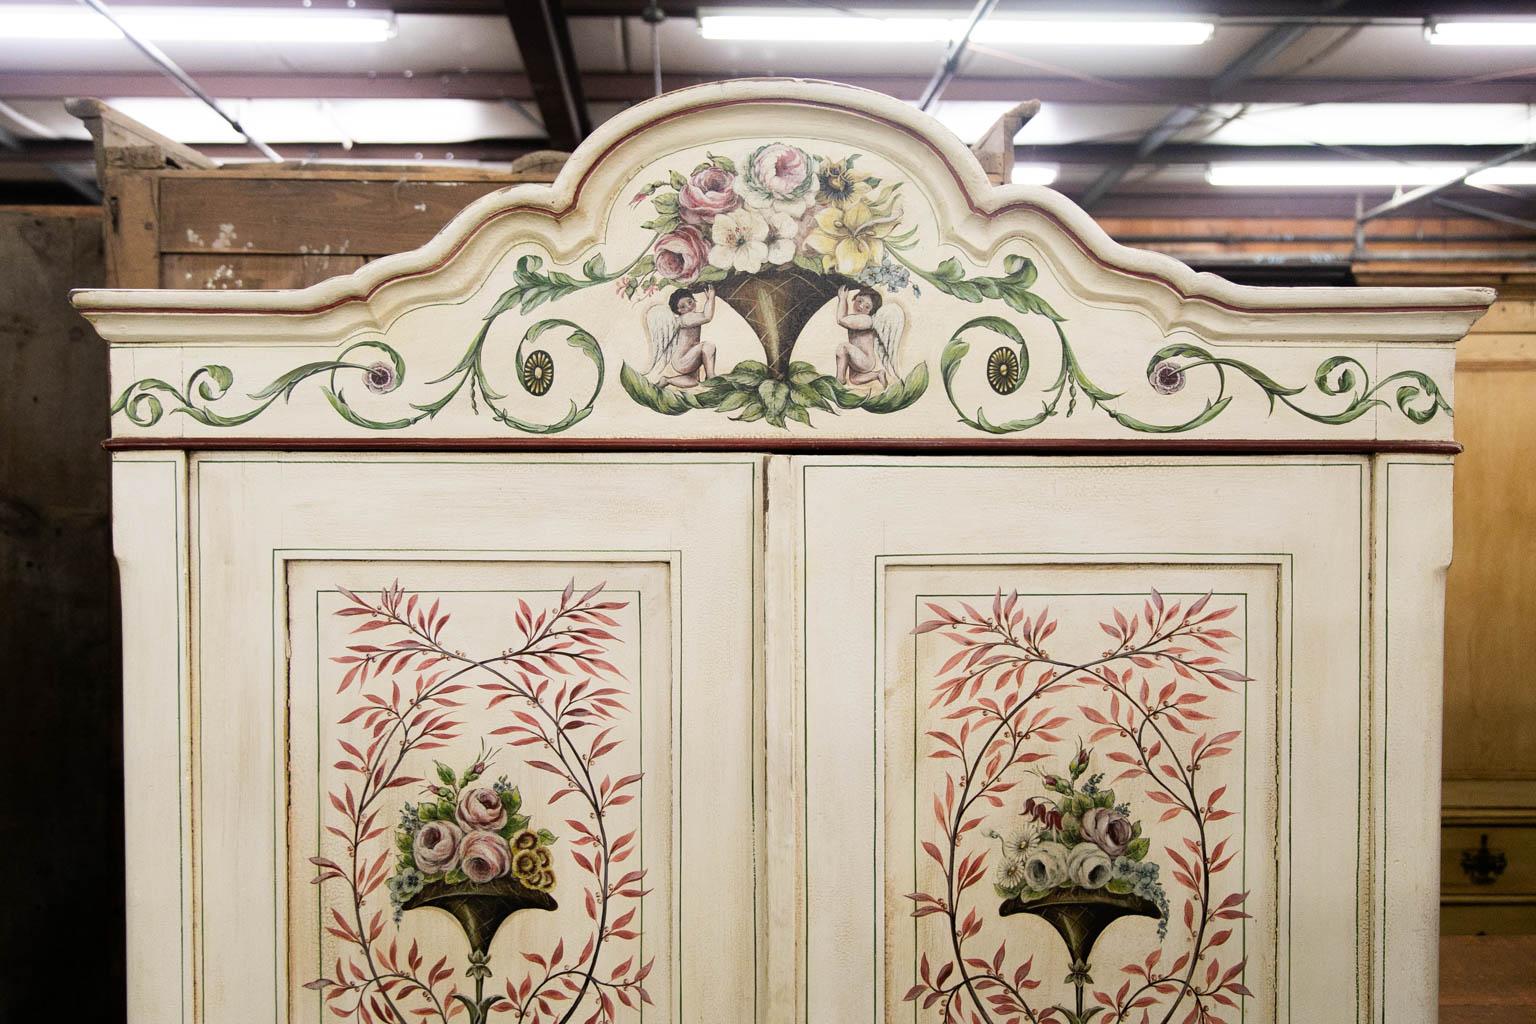 The doors of this armoire are painted with floral wreaths. The frieze is painted with floral arabesques and two cupids supporting a basket of flowers. The interior has a center divider. The right hand side has one shelf but has three additional